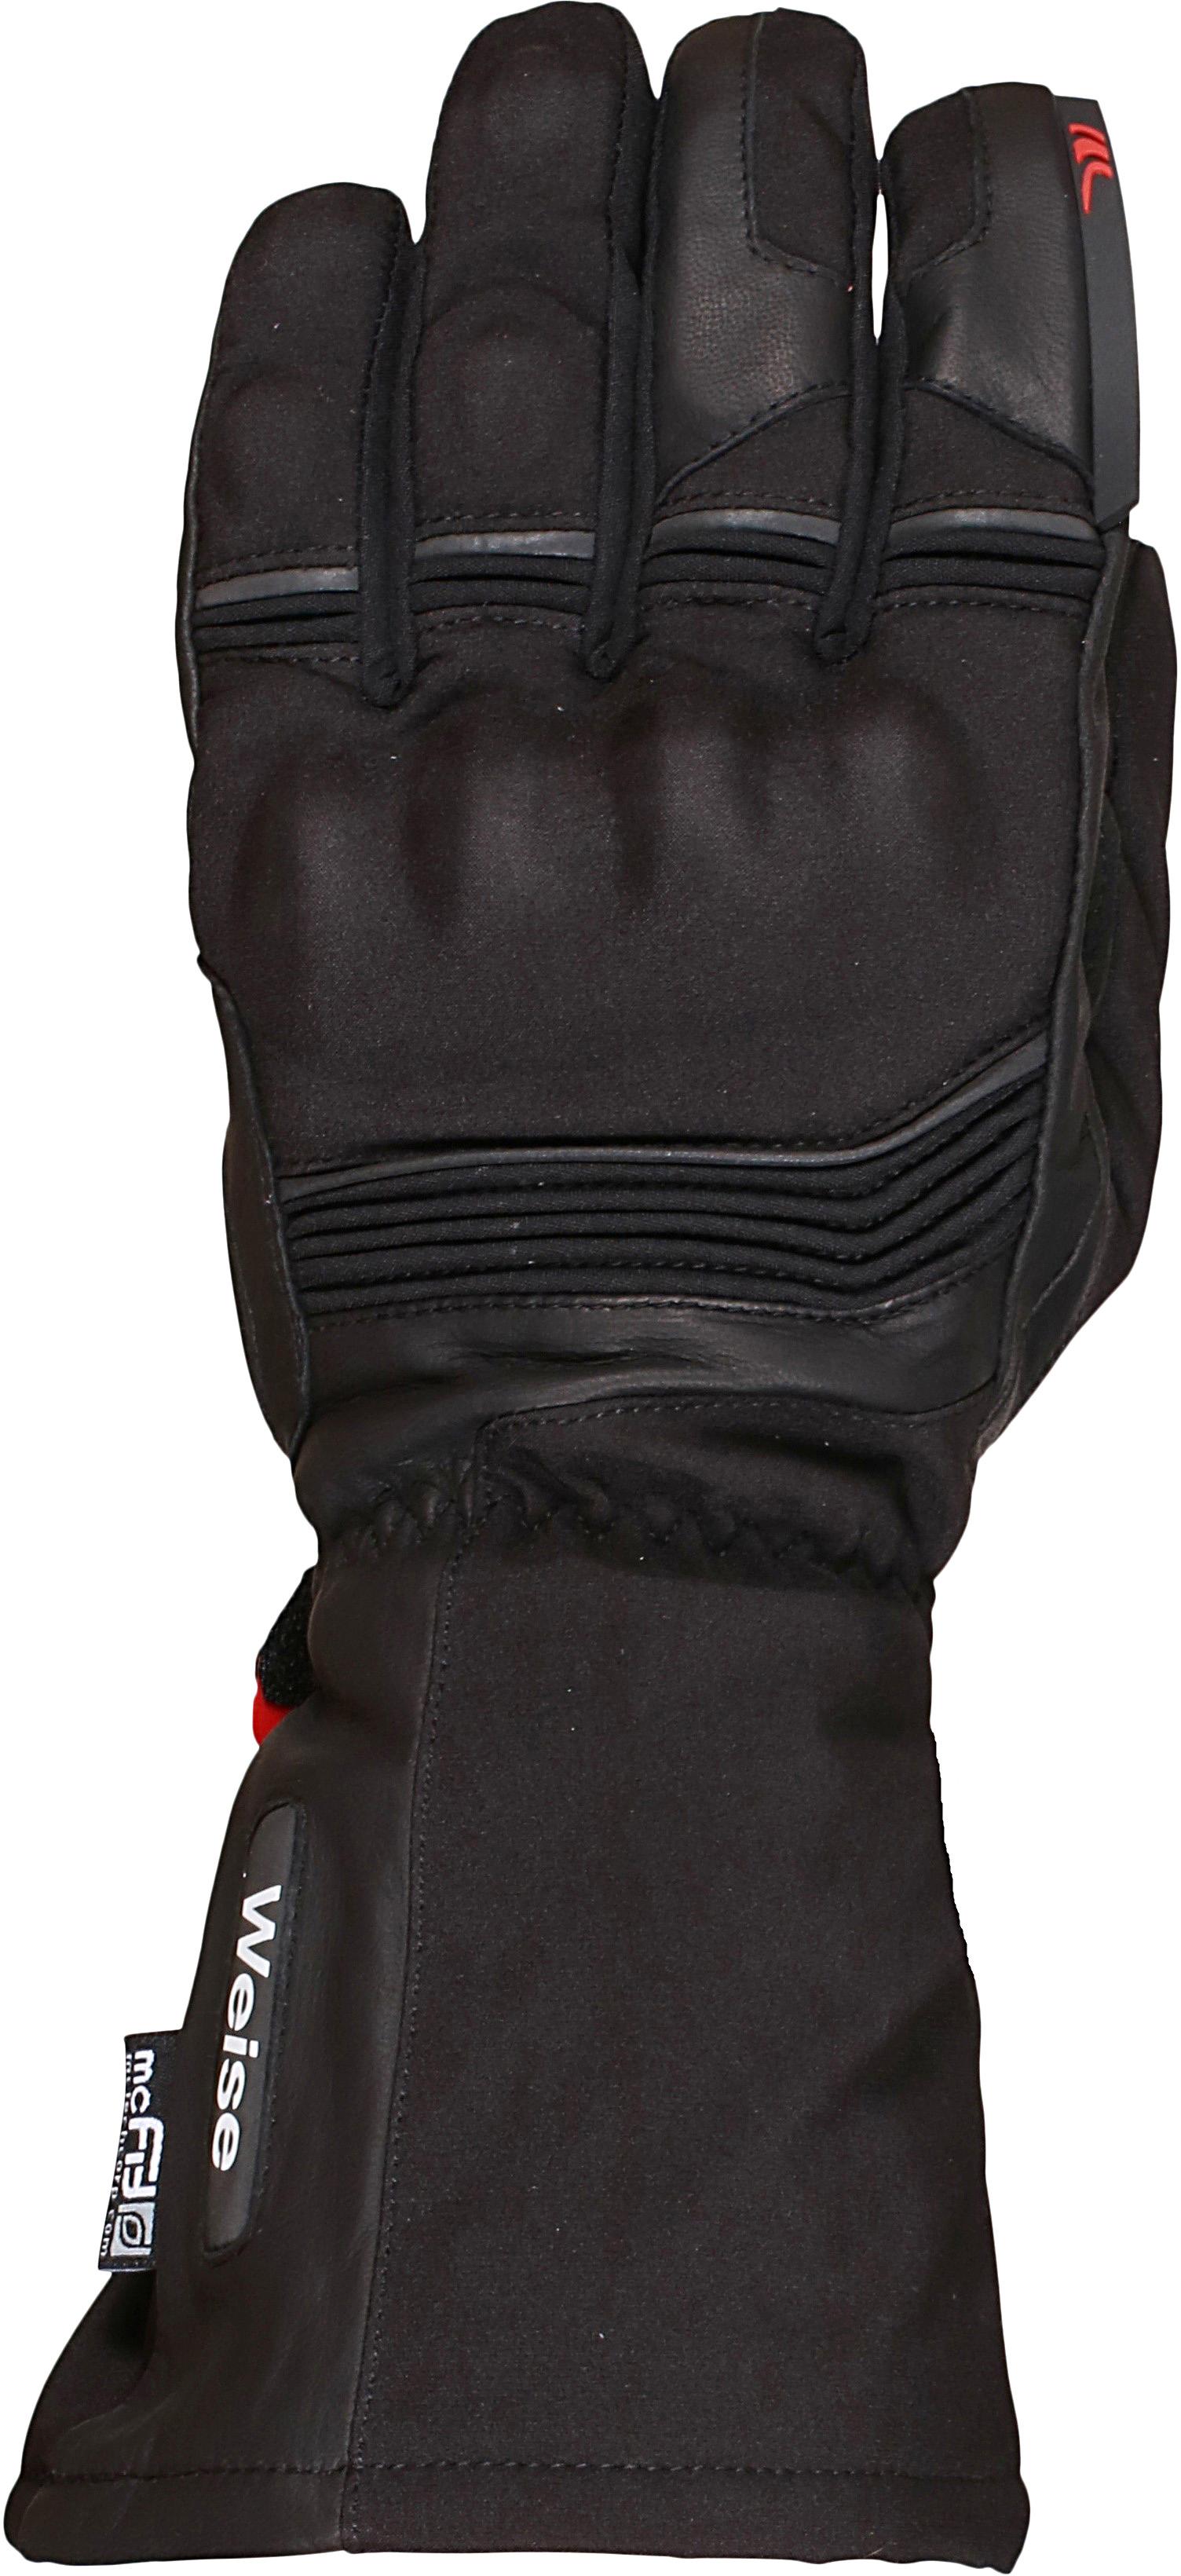 Weise Montana 150 Motorcycle Gloves - Black, S